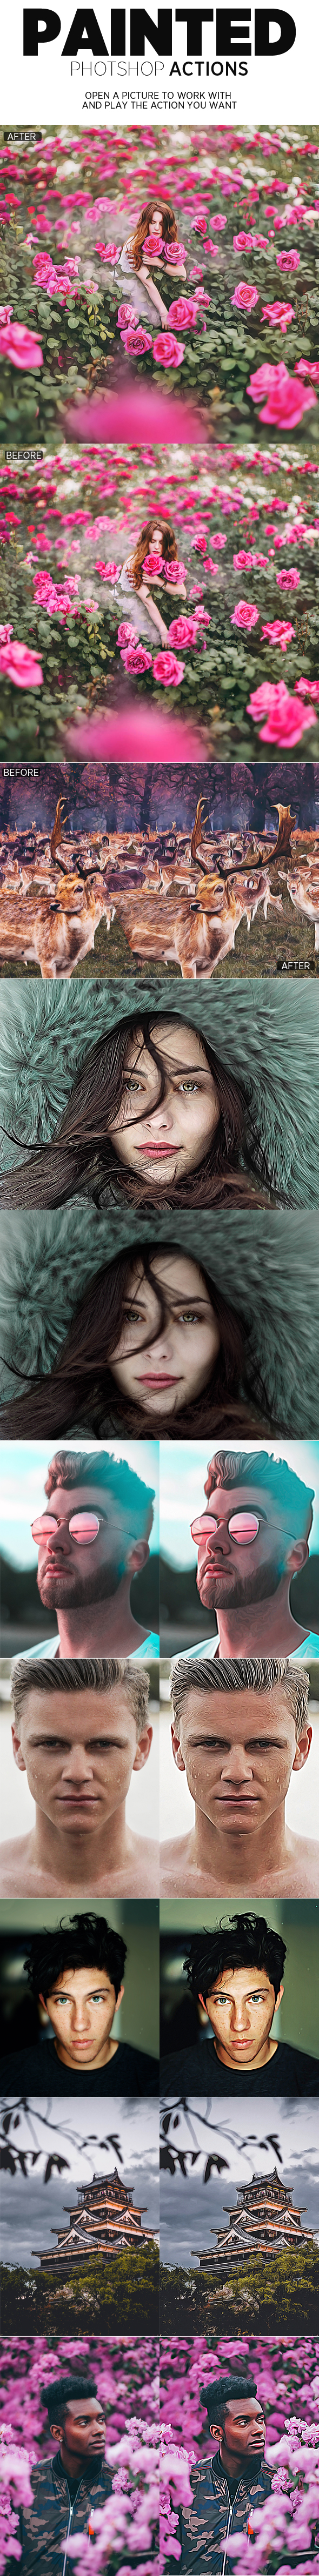 GraphicRiver Painted Photoshop Actions 20816005